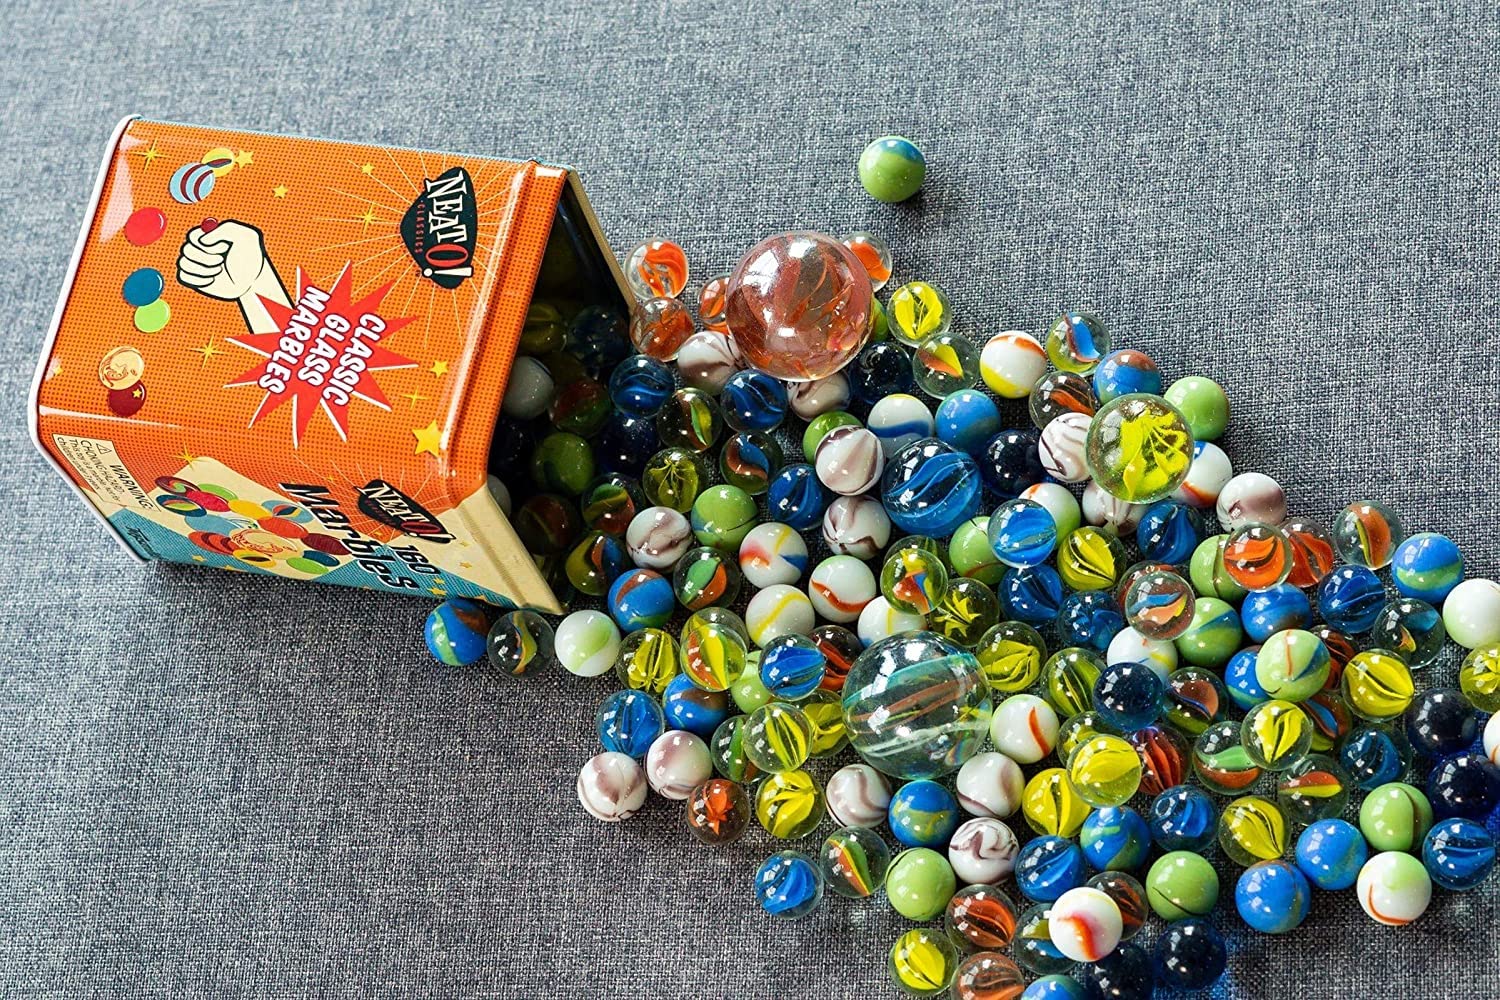 Neato! Classics 160 Marbles In A Tin Box by Toysmith - Retro Nostalgia Glass Shooter, Marble Games Are Timeless Play For Kids - Boys & Girls